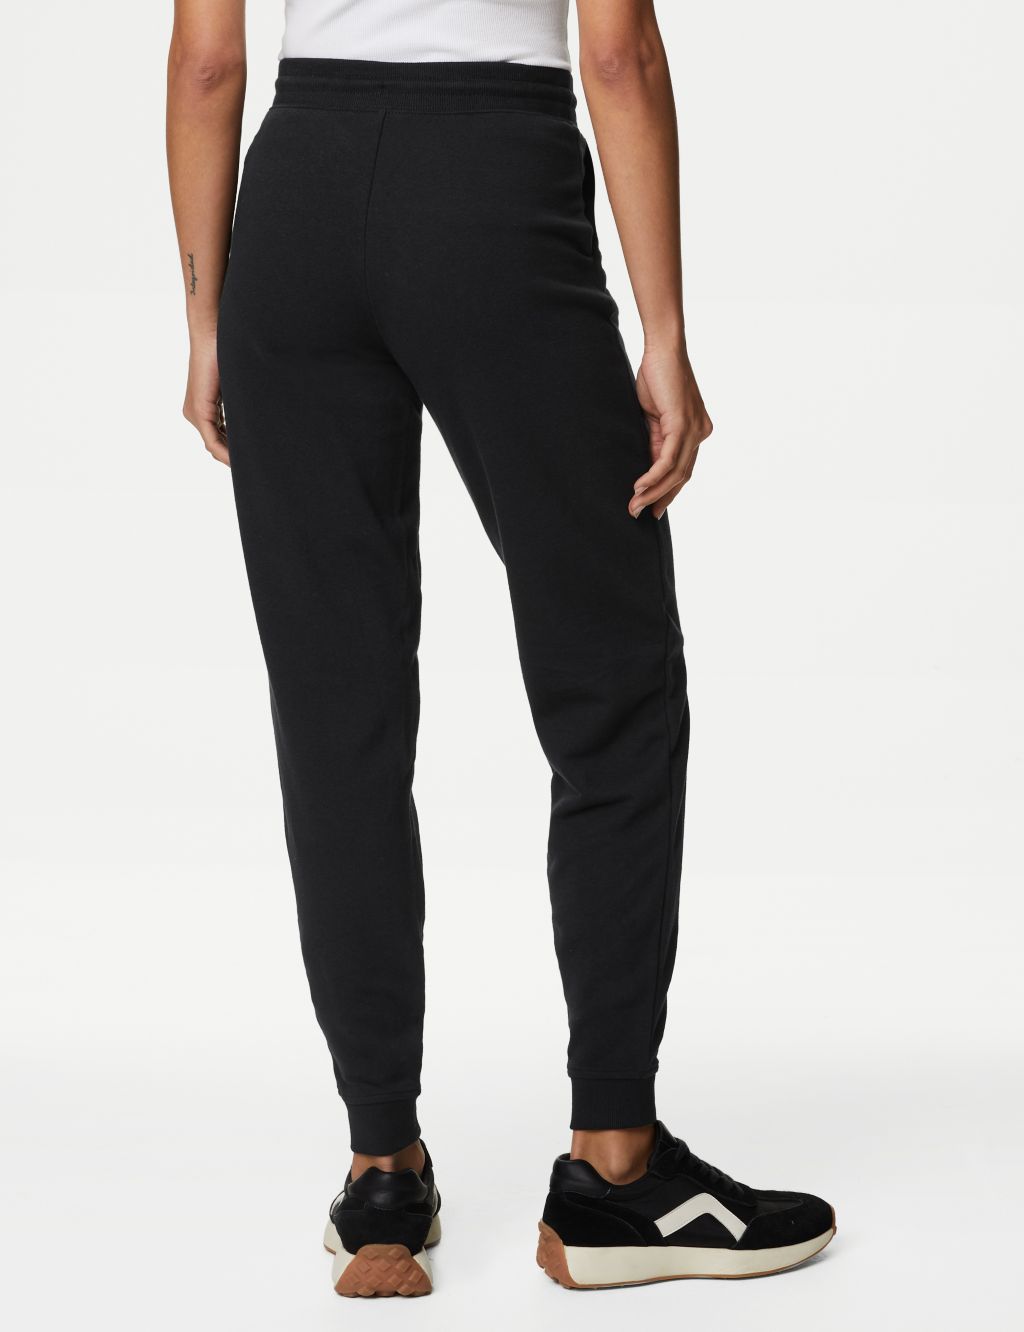 The Cotton Rich Cuffed Joggers image 5